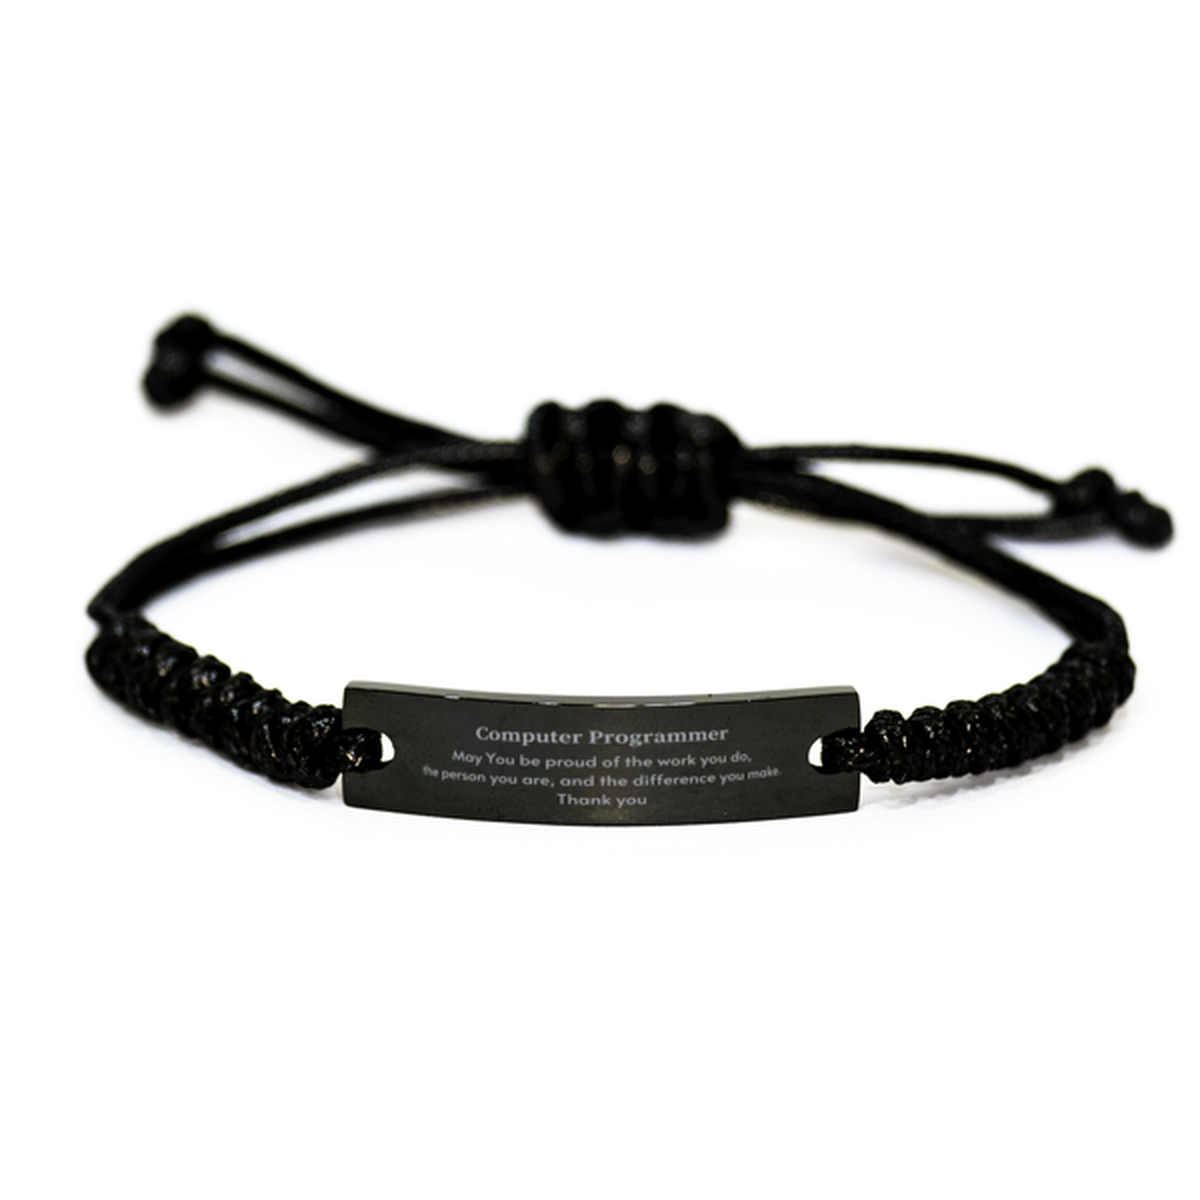 Heartwarming Black Rope Bracelet Retirement Coworkers Gifts for Computer Programmer, Computer Programmer May You be proud of the work you do, the person you are Gifts for Boss Men Women Friends